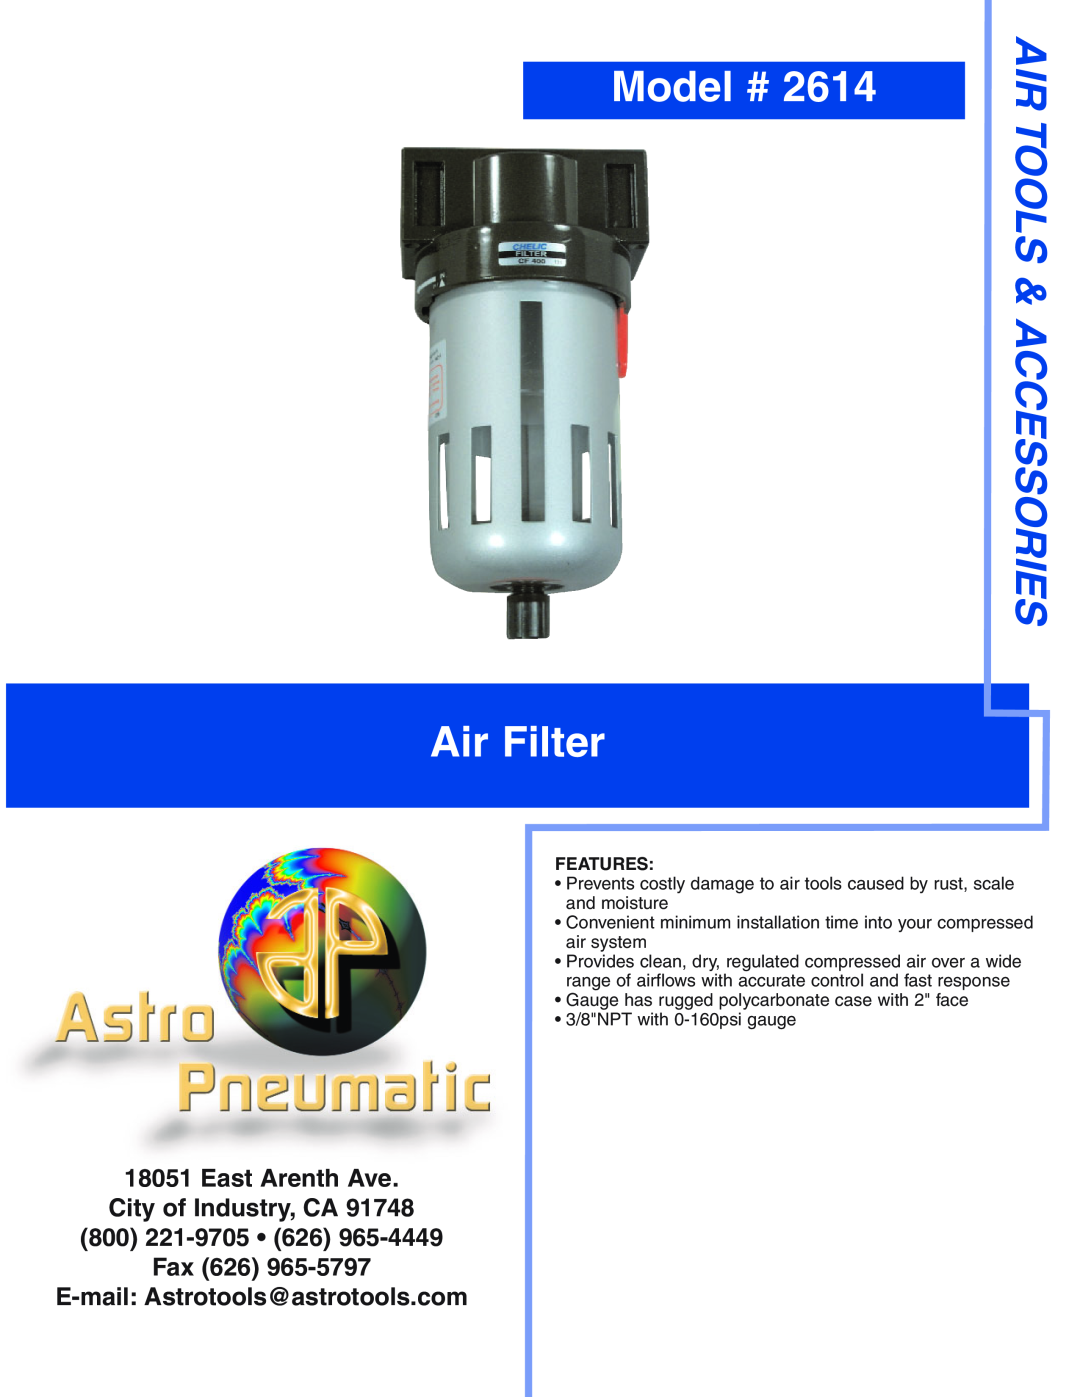 Astro Pneumatic 2614 manual Model # Air Filter, Air Tools & Accessories, East Arenth Ave City of Industry, CA, Features 